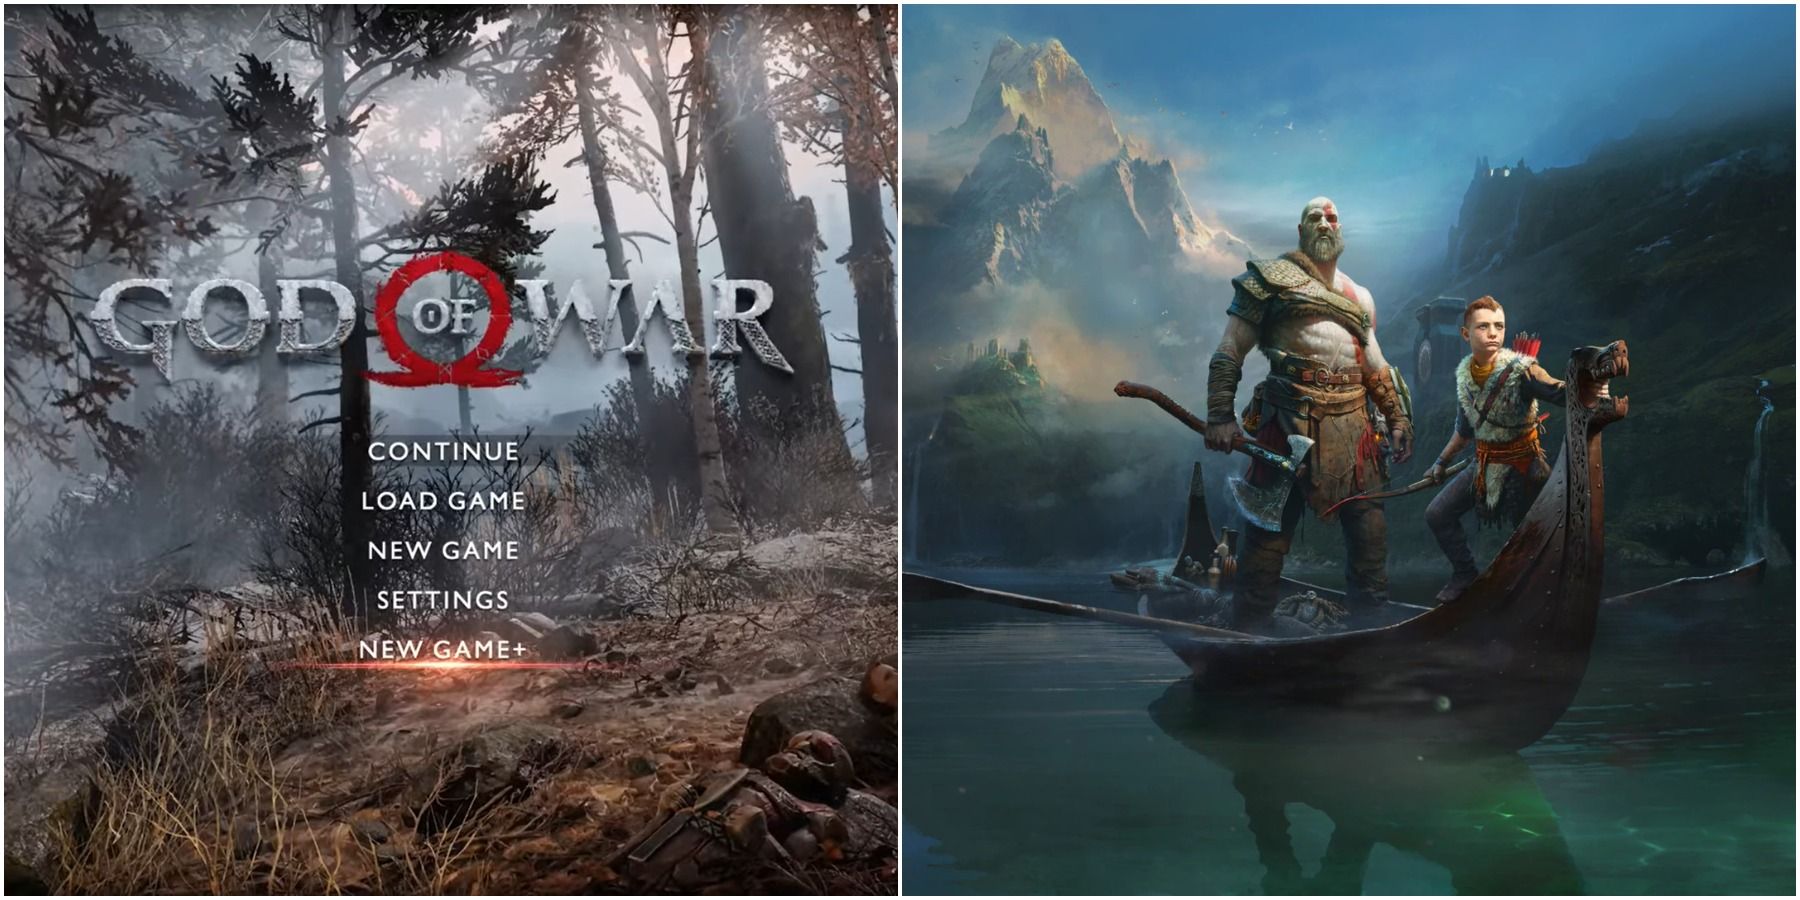 God of War'  series needs to keep the best part of the games